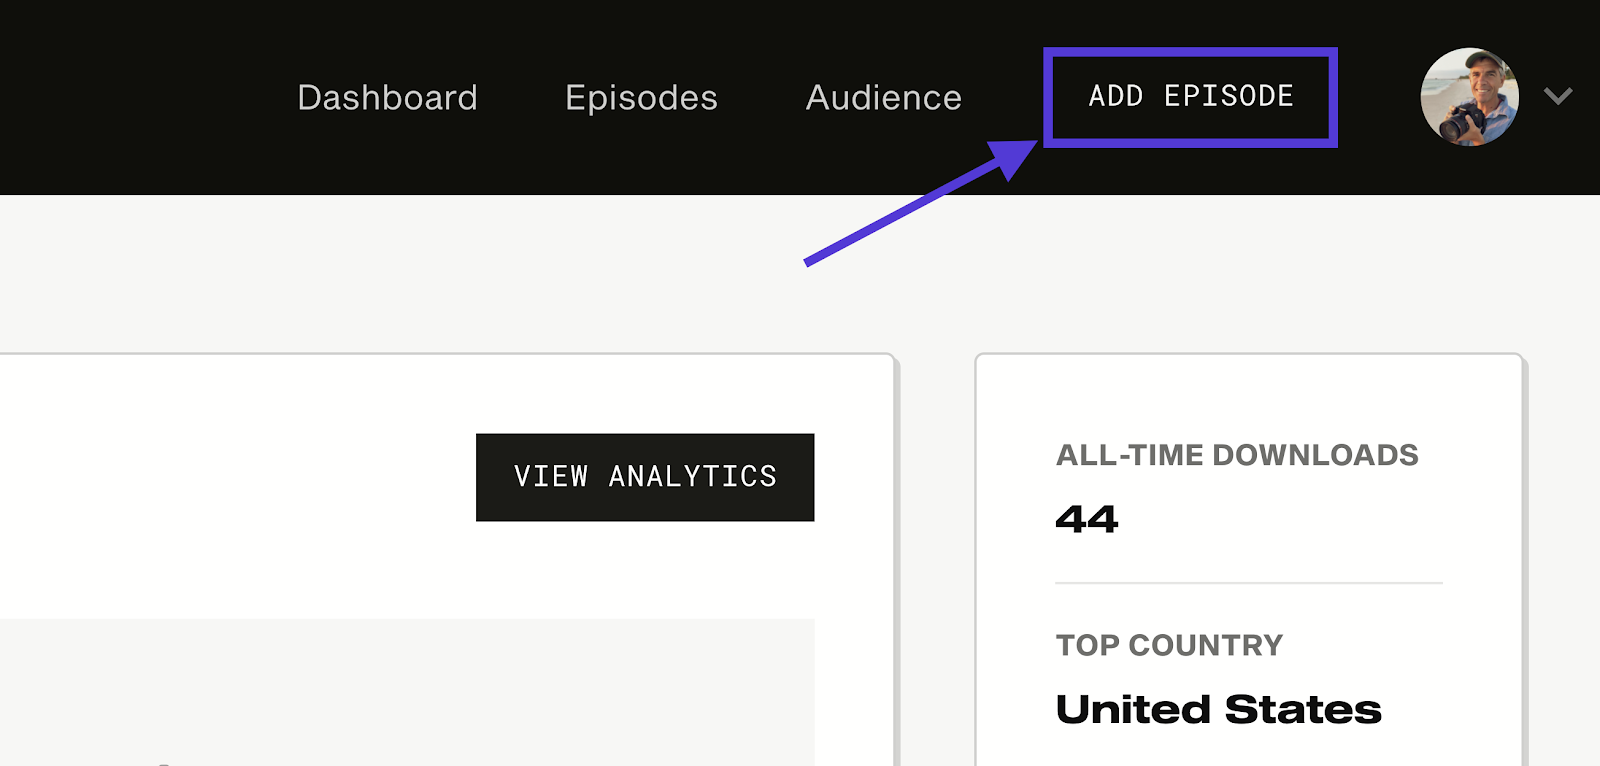 The Add episode button on Simplecast